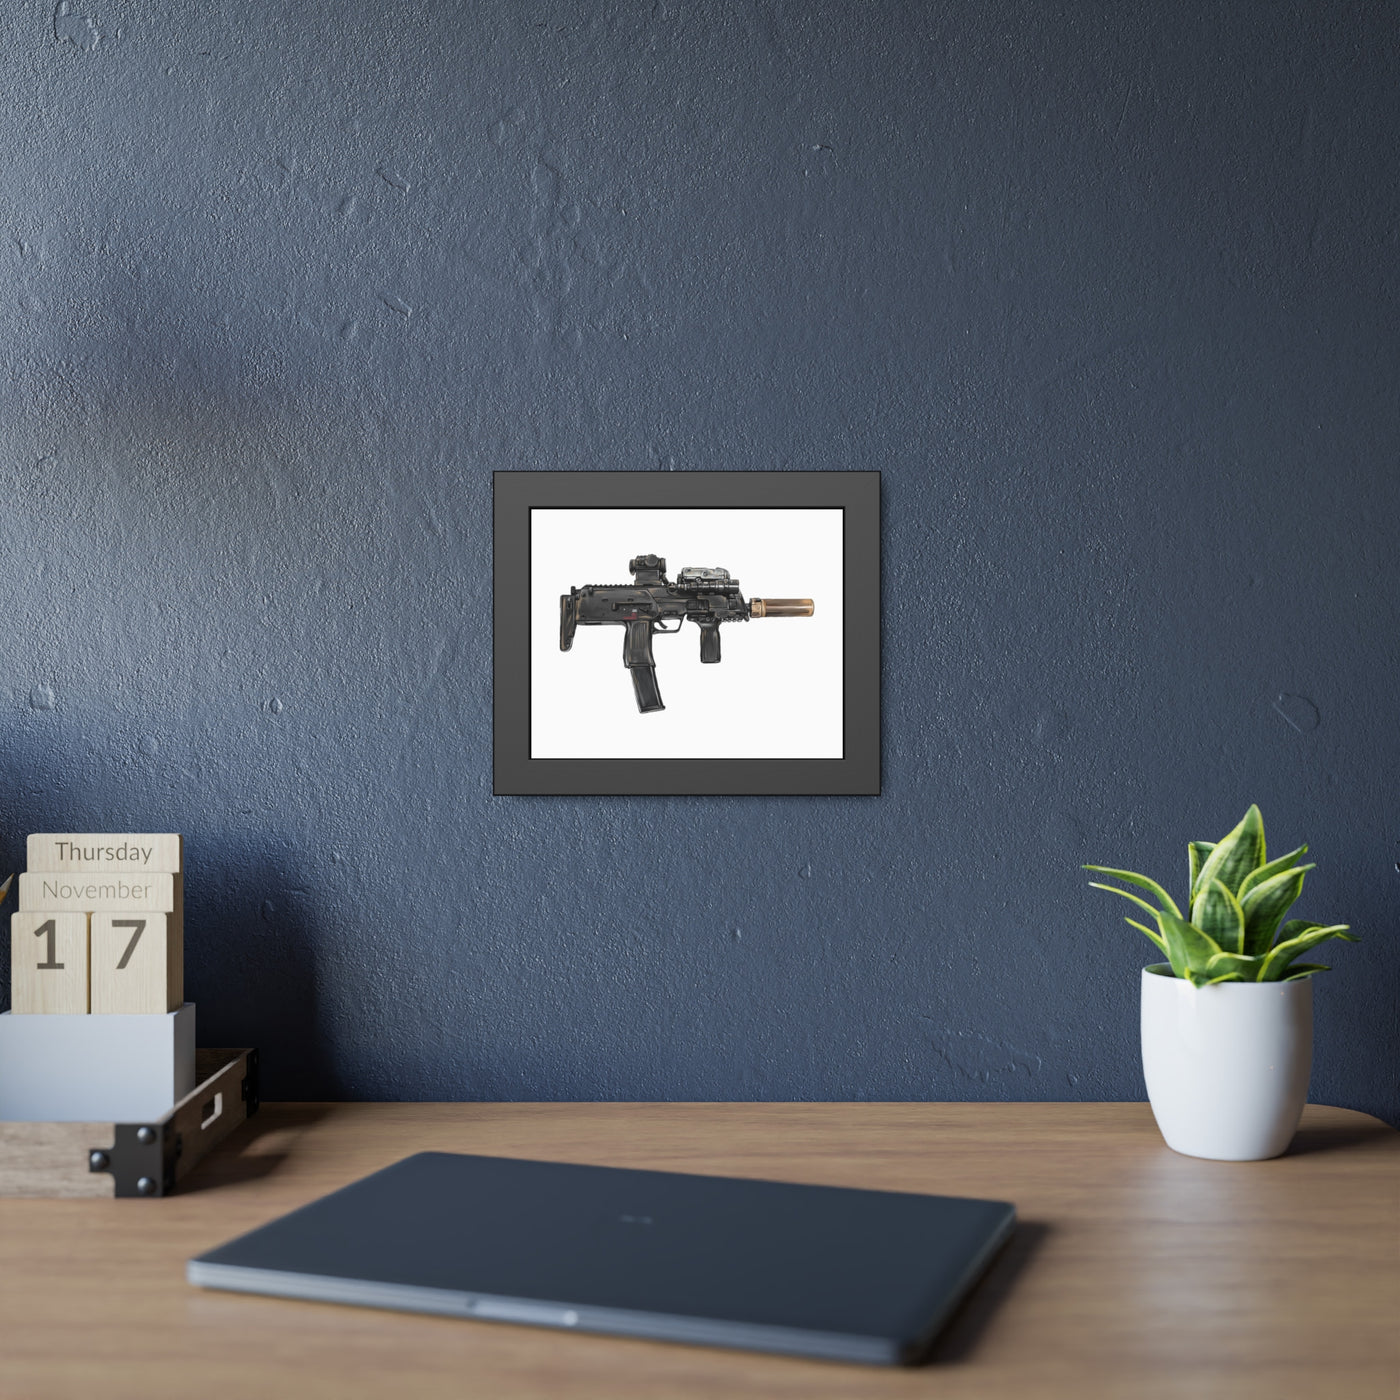 German 4.6x30mm Sub Machine Gun Painting - Just The Piece - Black Frame - Value Collection